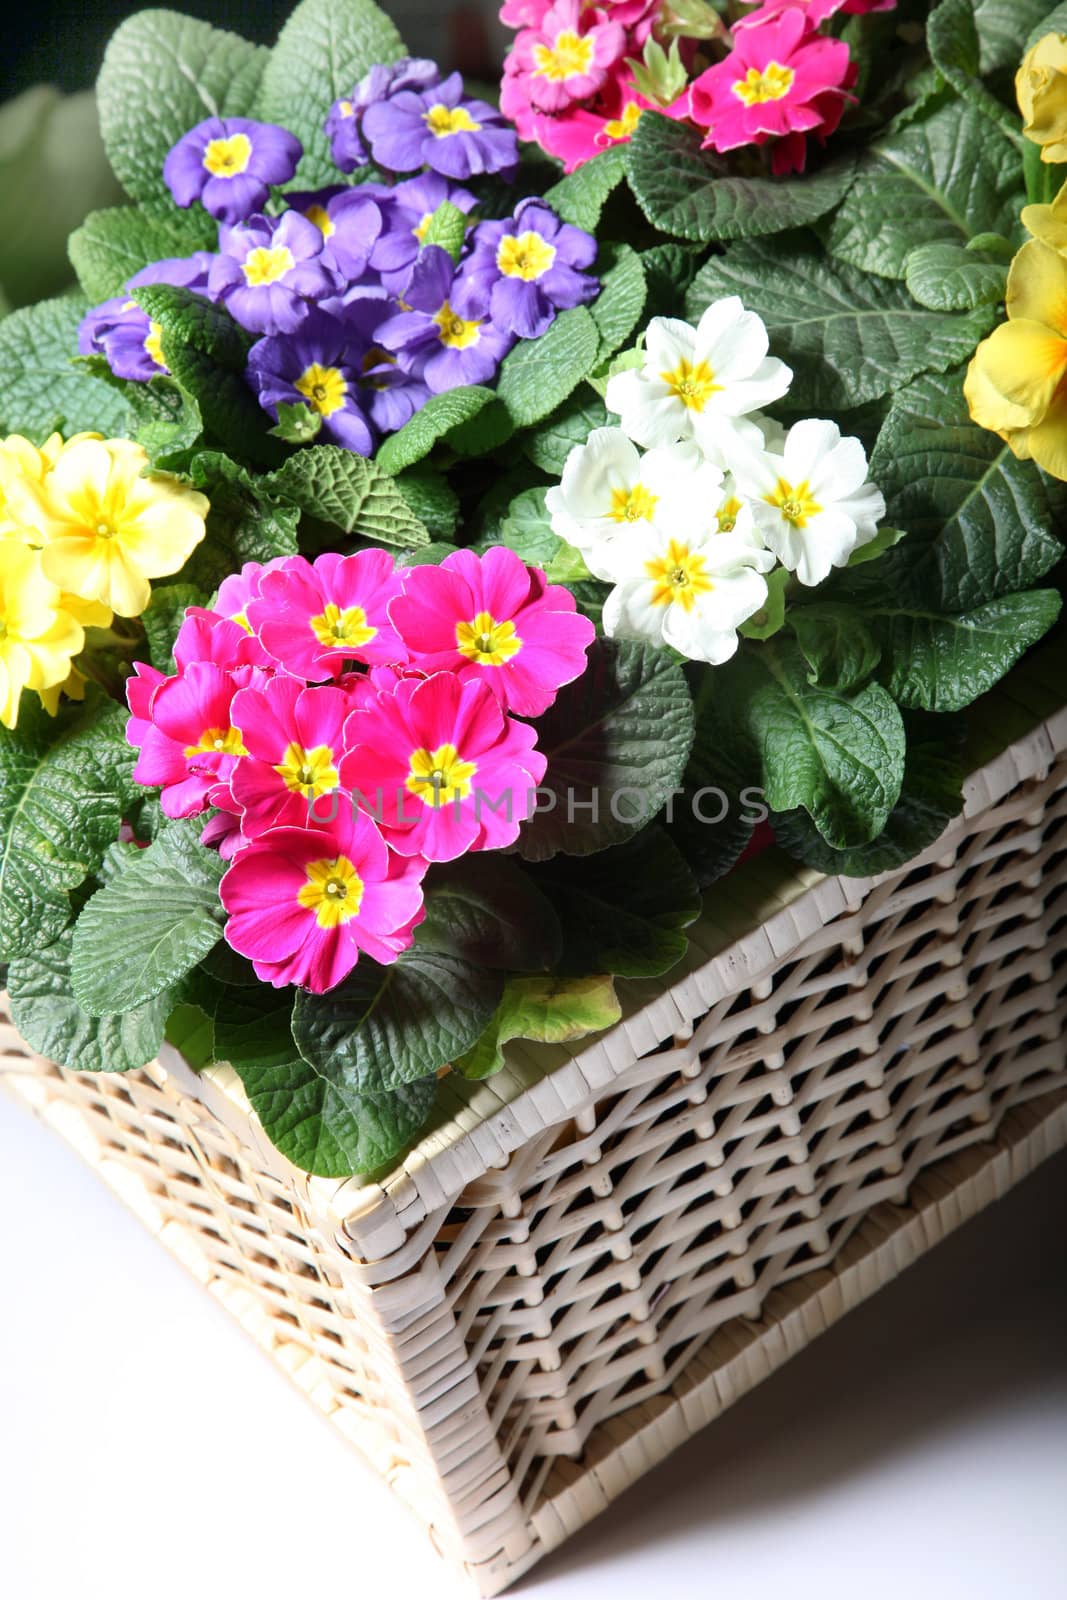 Colorful primroses in the basket by Farina6000